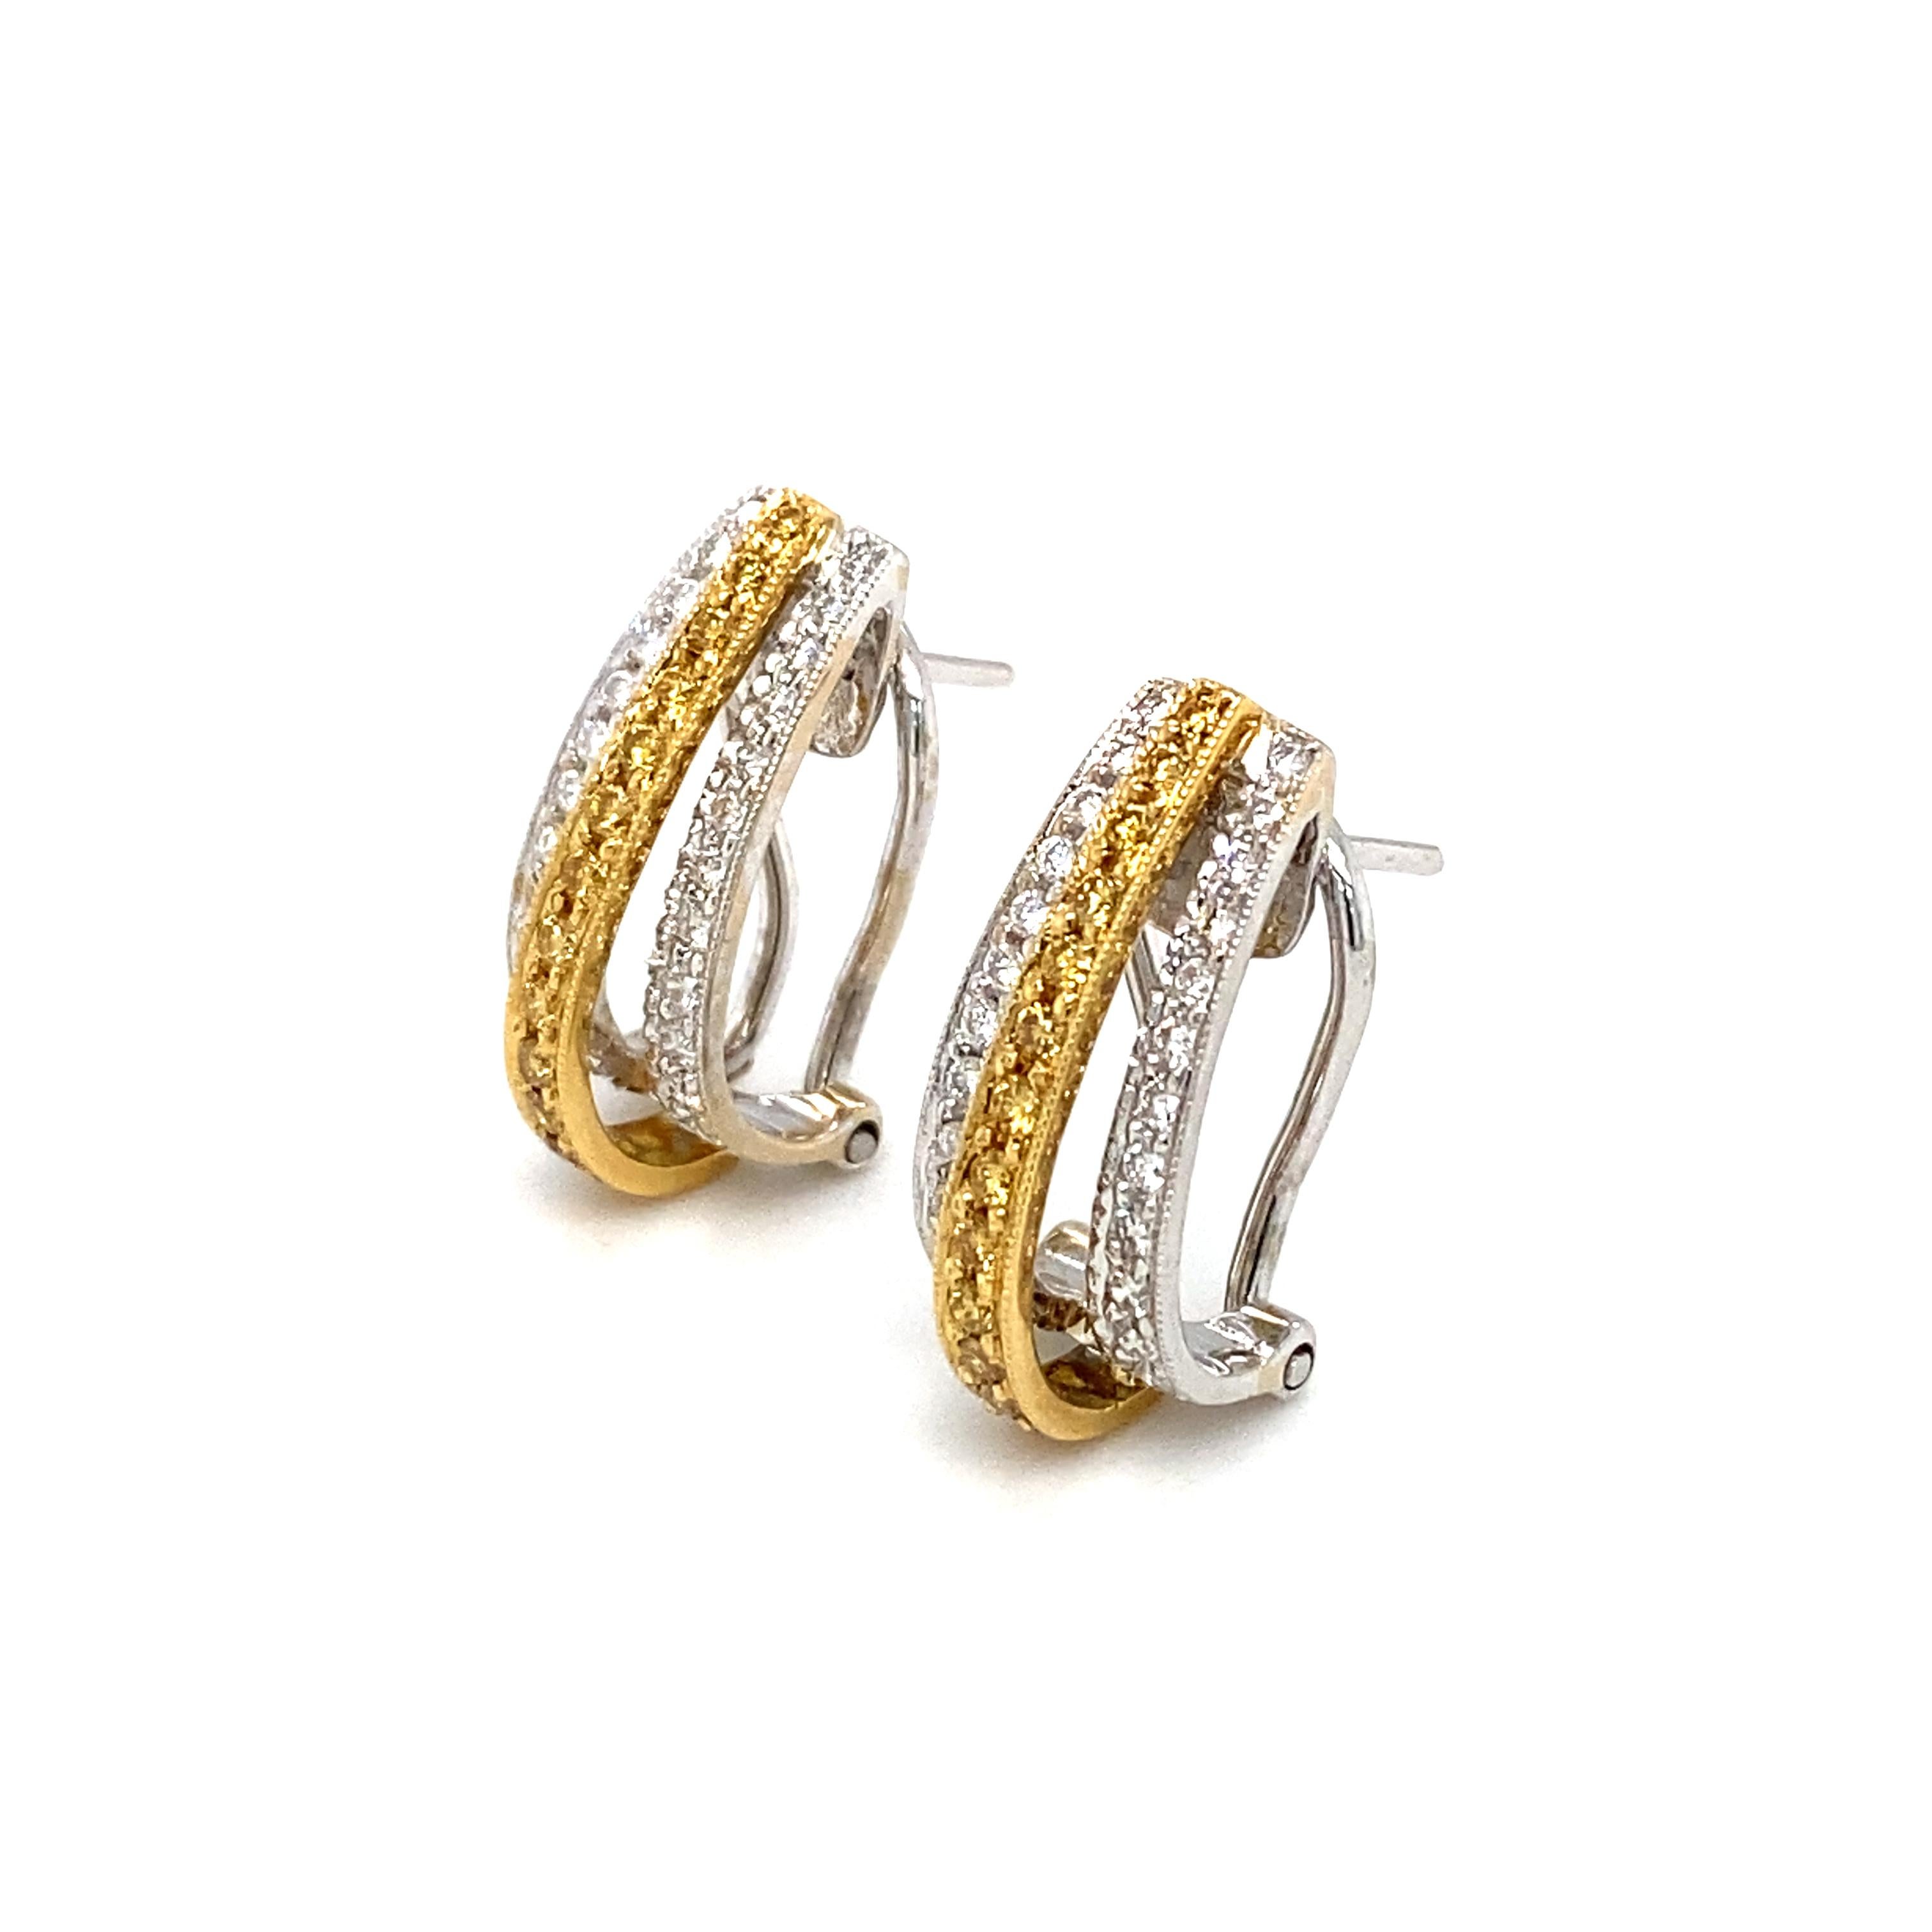 Circa 2010s 2.0 Carat Yellow and White Diamond Earrings in 18 Karat Gold  For Sale 1